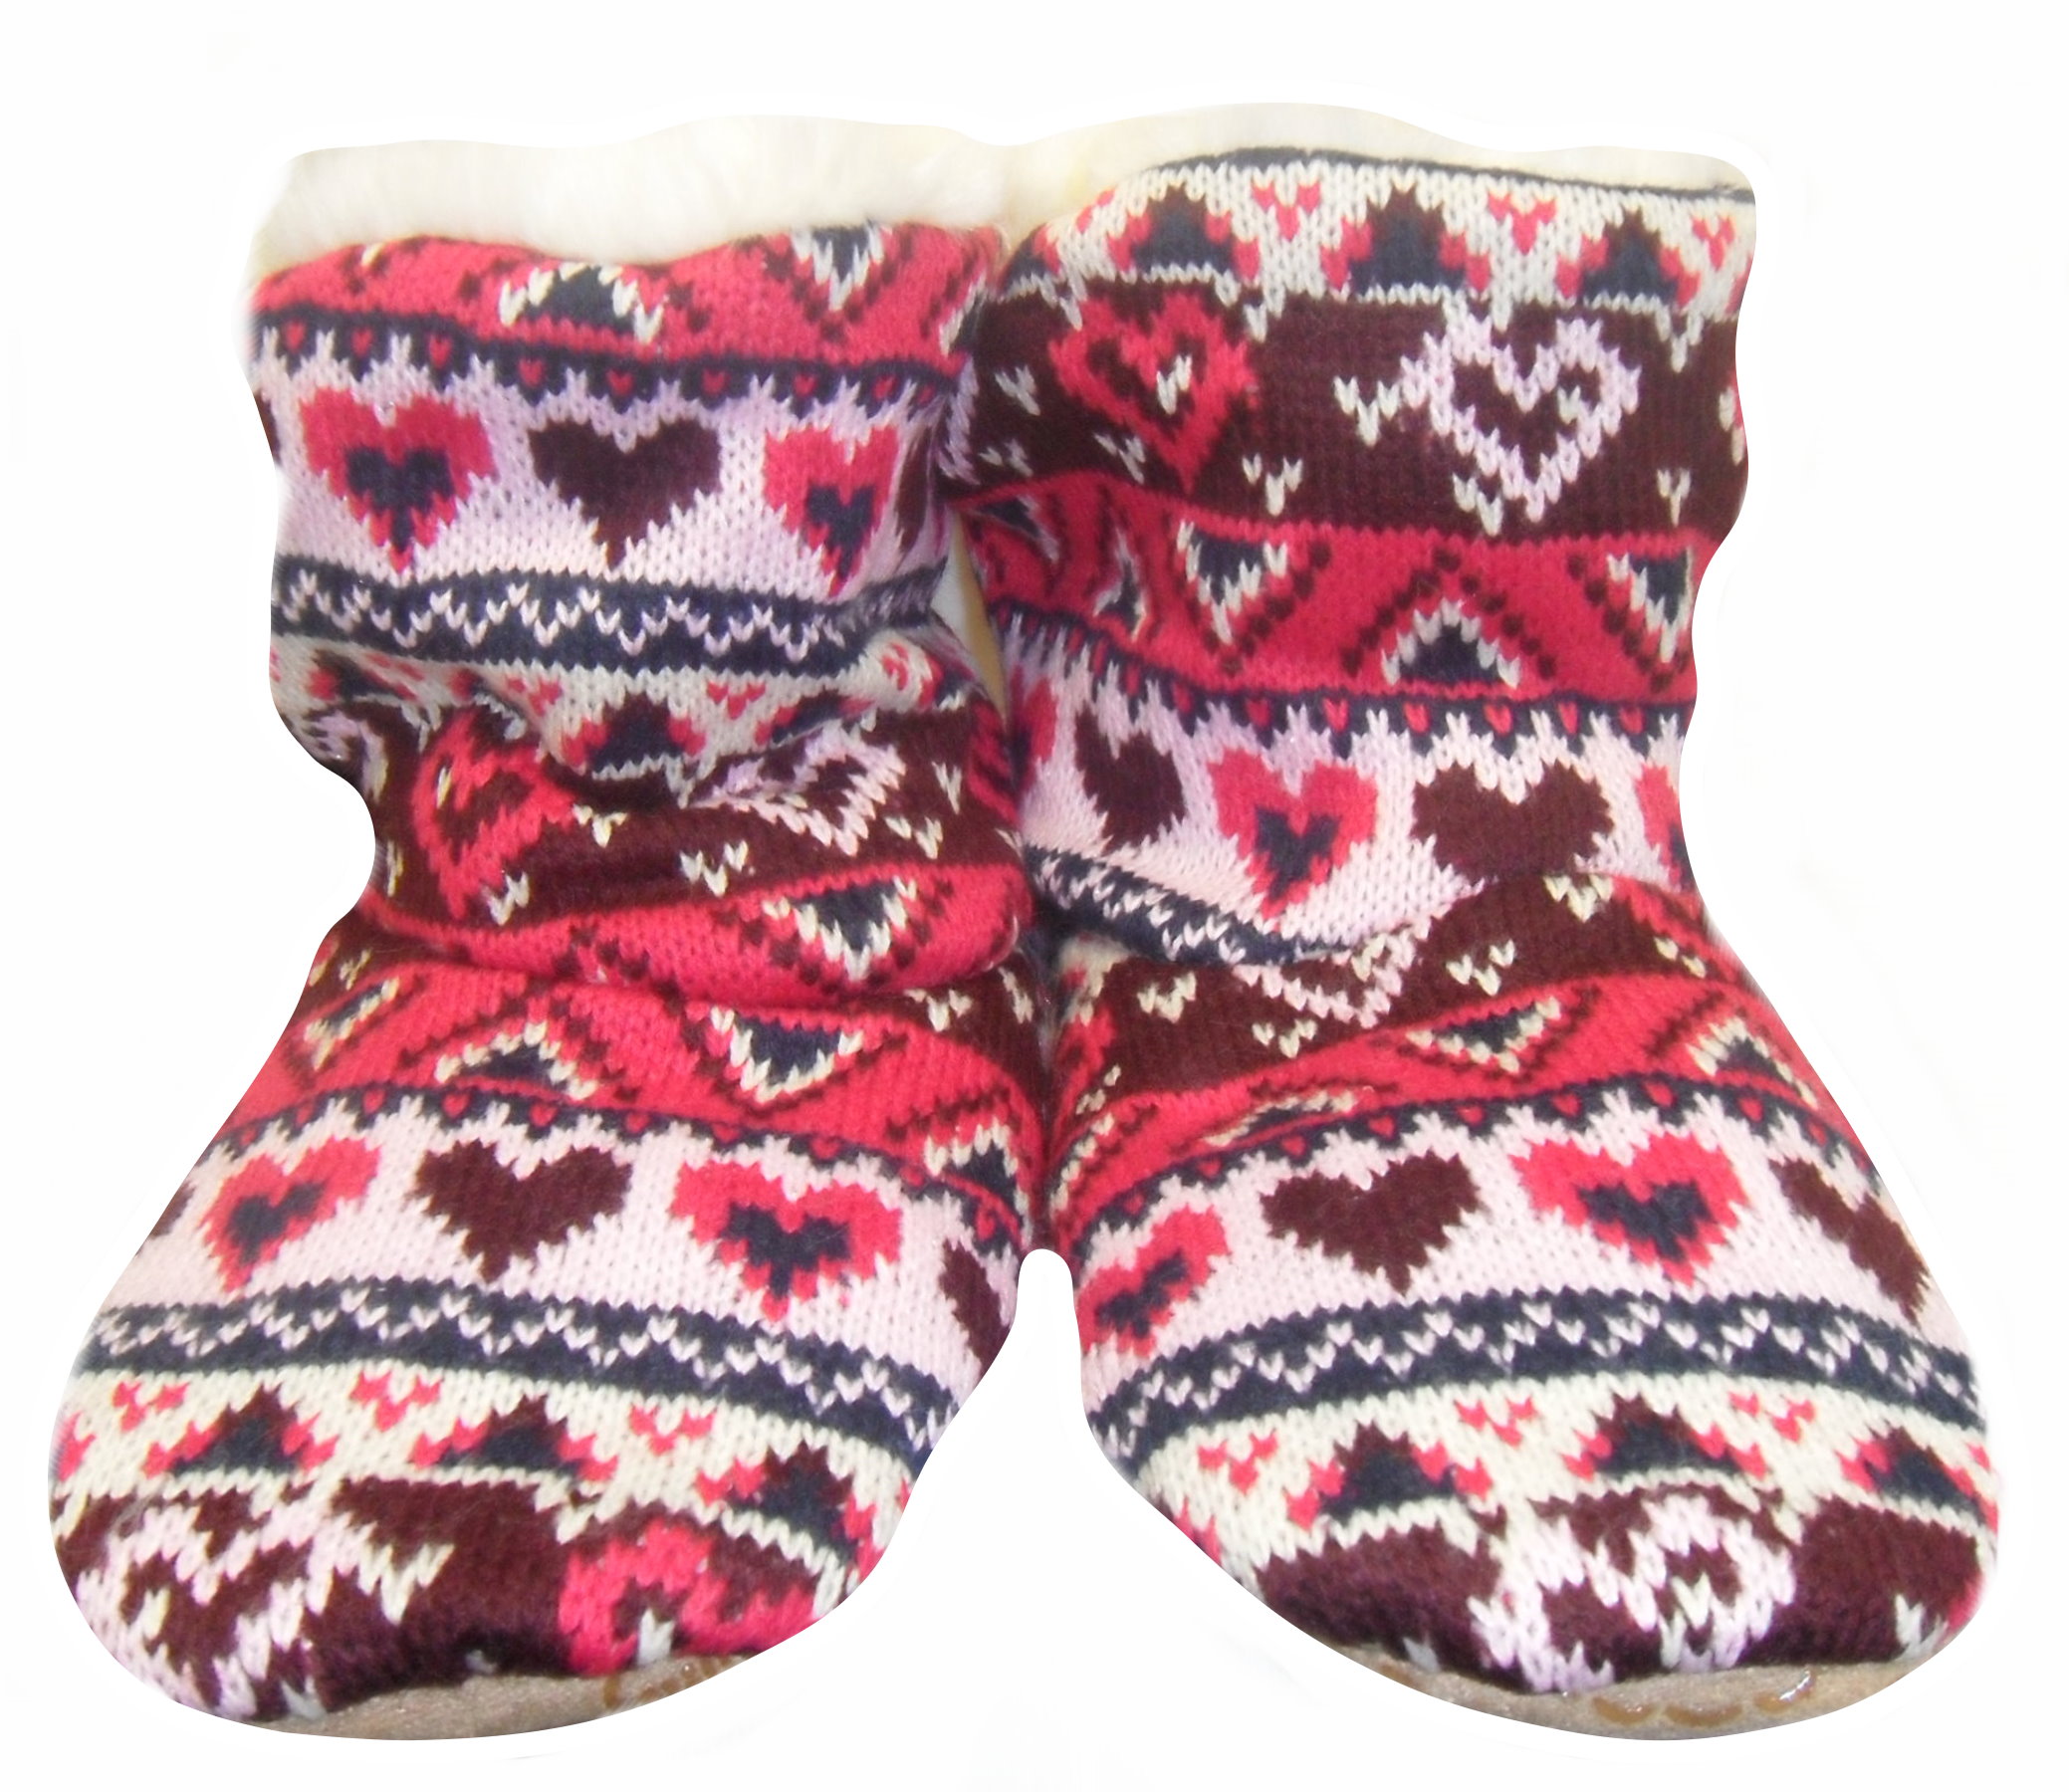 Ladies KNitted Boots Bright Pink 1.JPG  by Thingimijigs